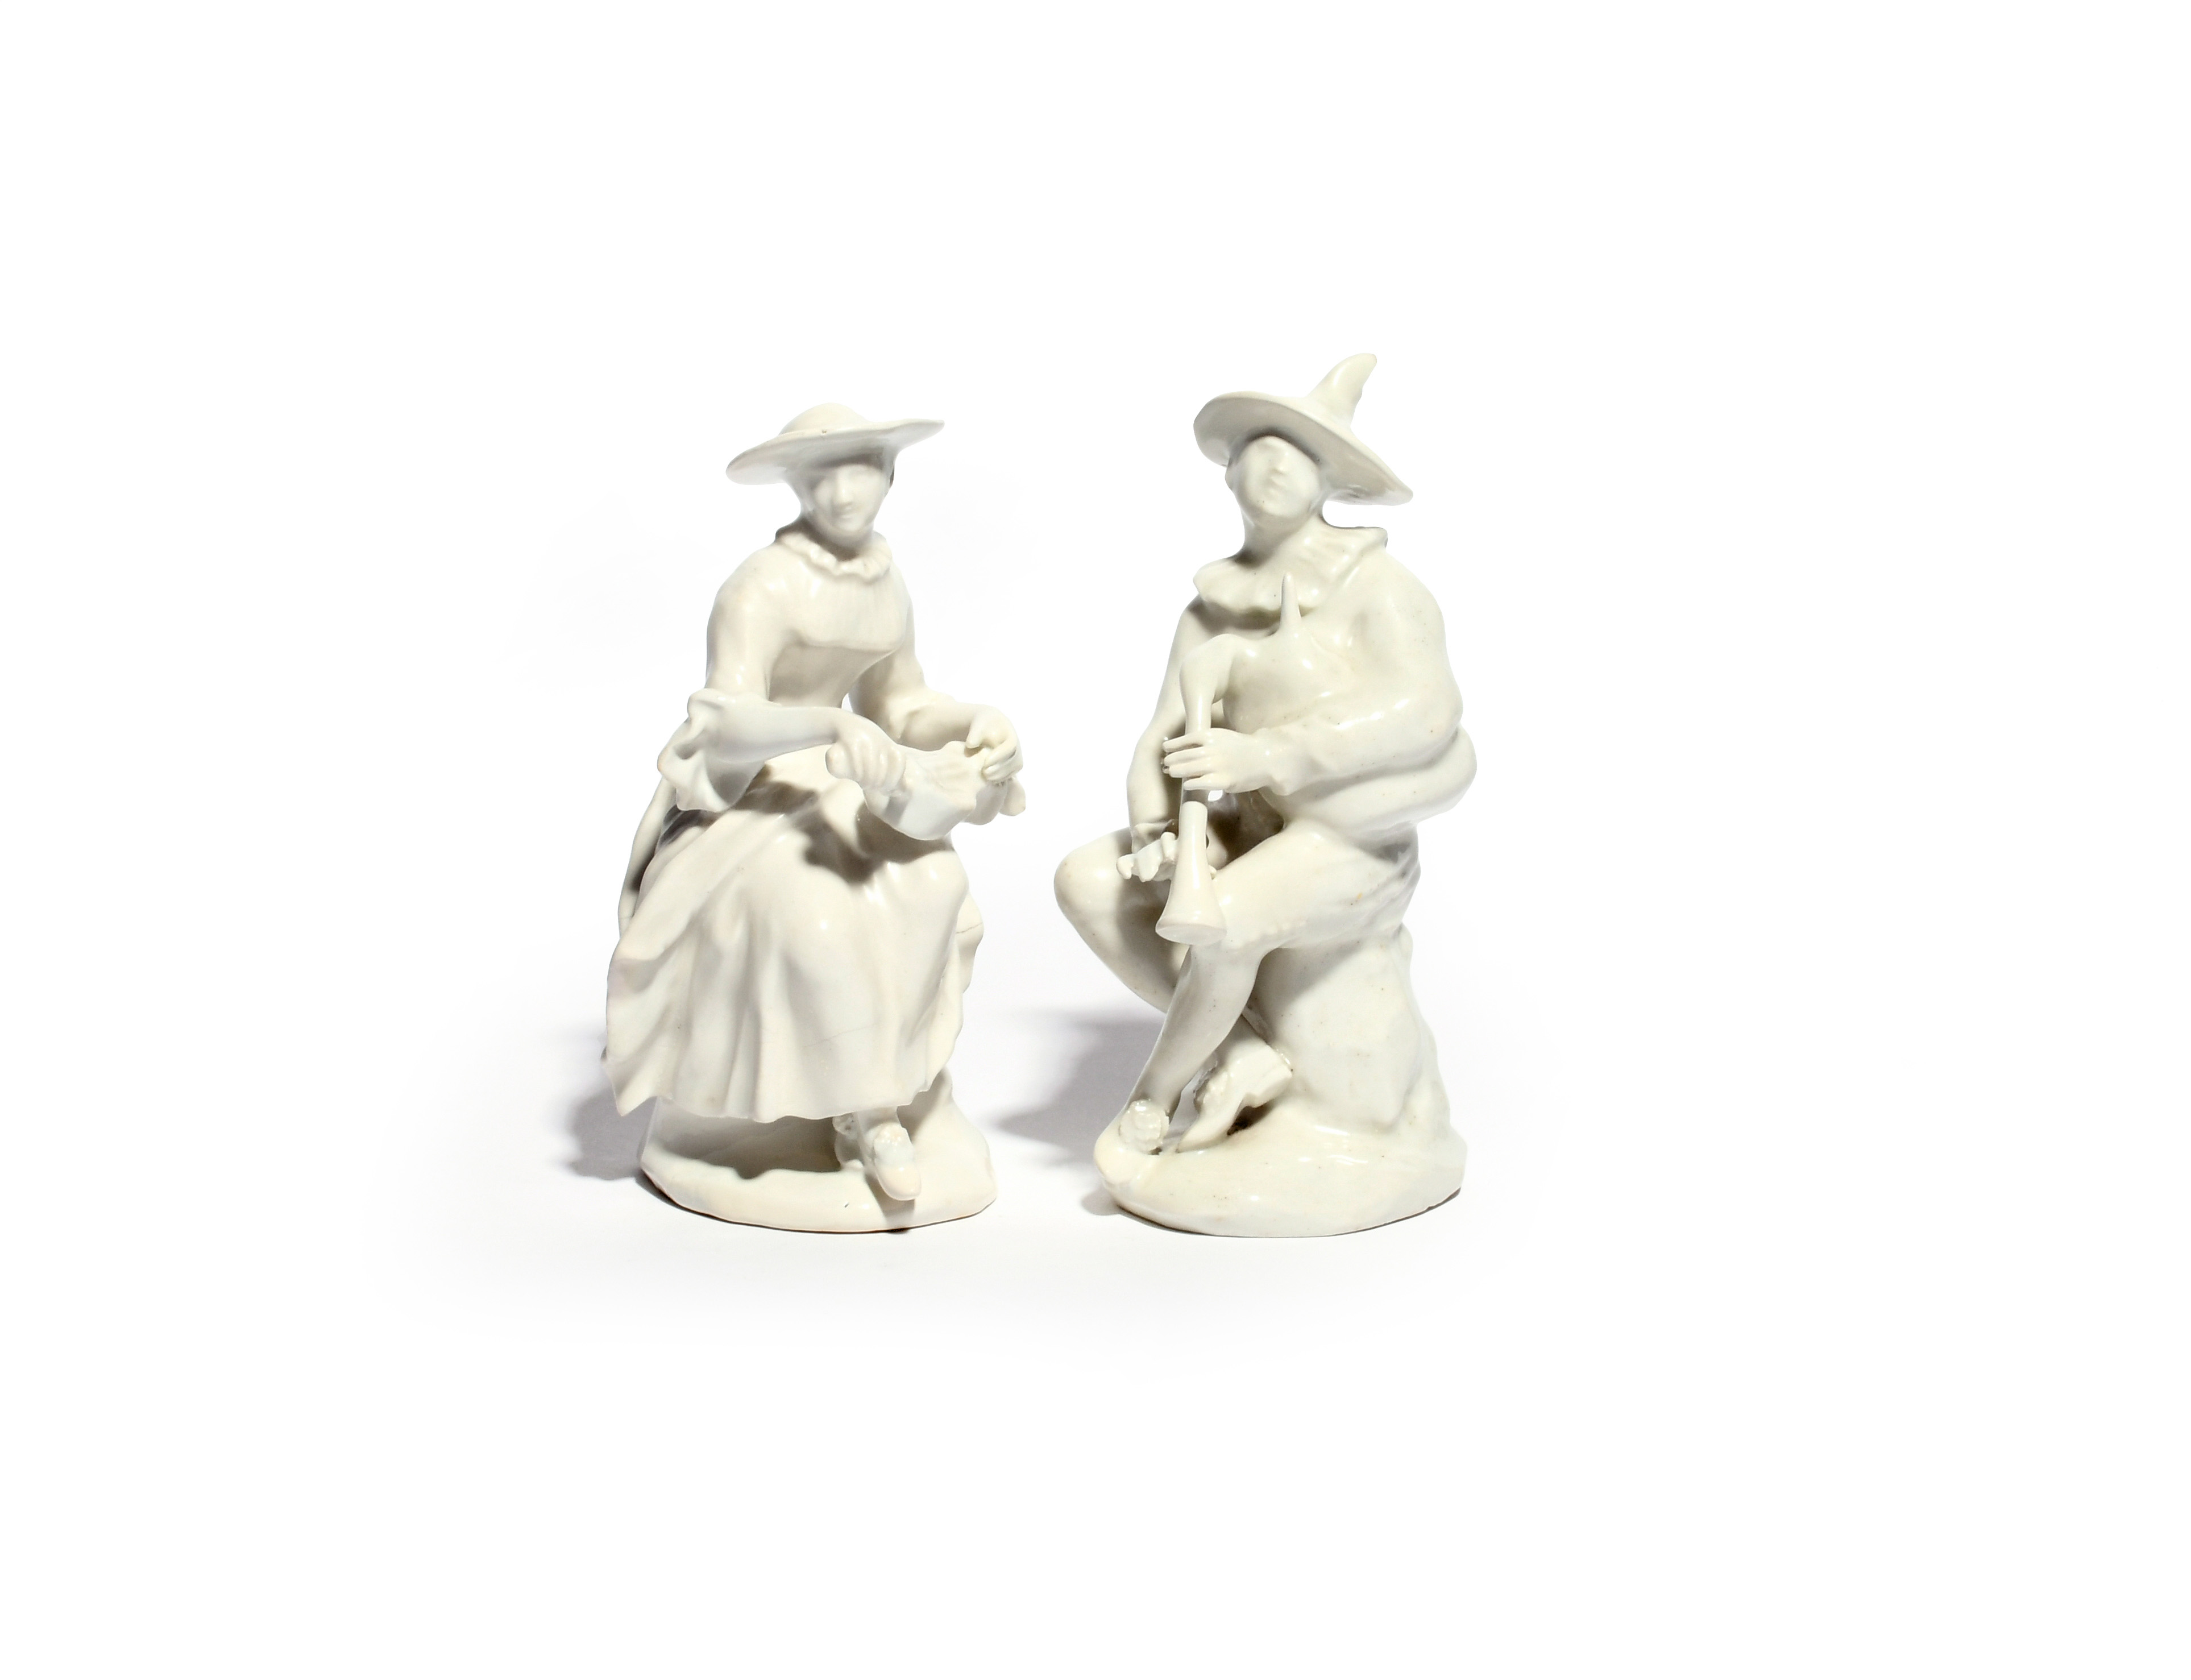 A pair of white-glazed Bow figures of Harlequin and Columbine c.1755-60, seated on rocky stumps,